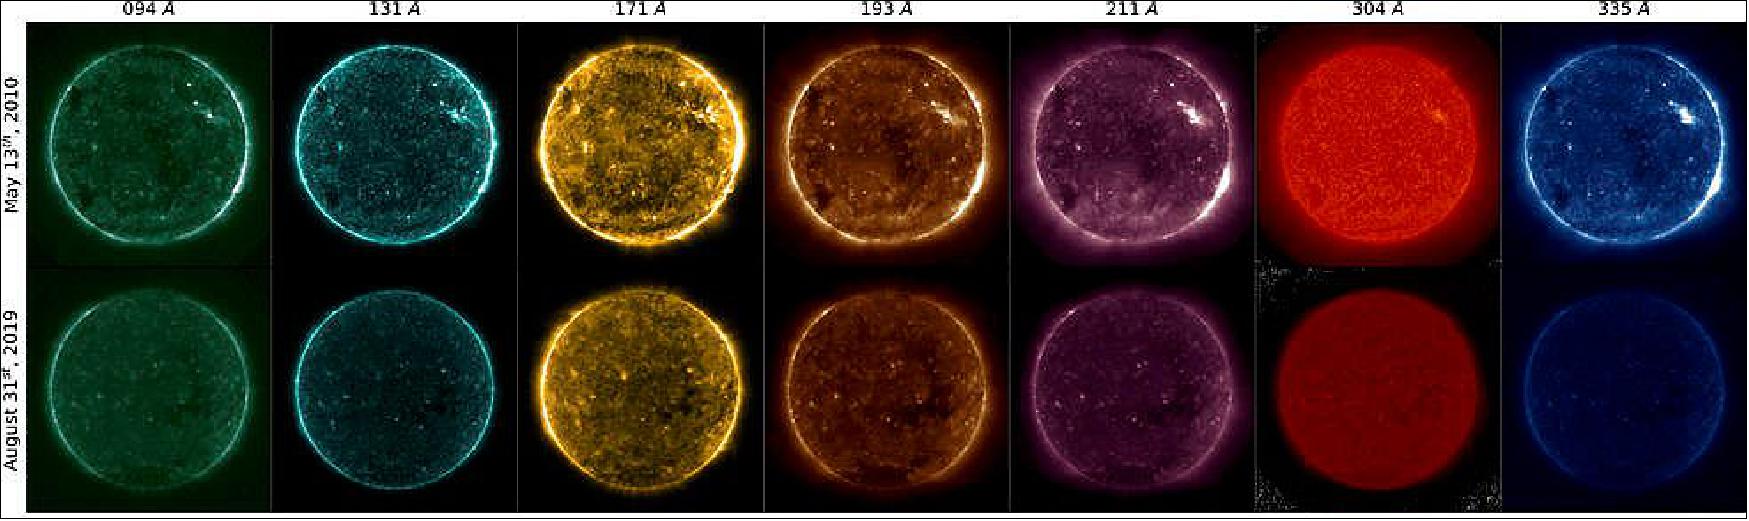 Figure 18: This image shows seven of the ultraviolet wavelengths observed by the AIA (Atmospheric Imaging Assembly) on board NASA's SDO. The top row are observations taken from May 2010 and the bottom row shows observations from 2019, without any corrections, showing how the instrument degraded over time (image credit: NASA/GSFC, Luiz Dos Santos)